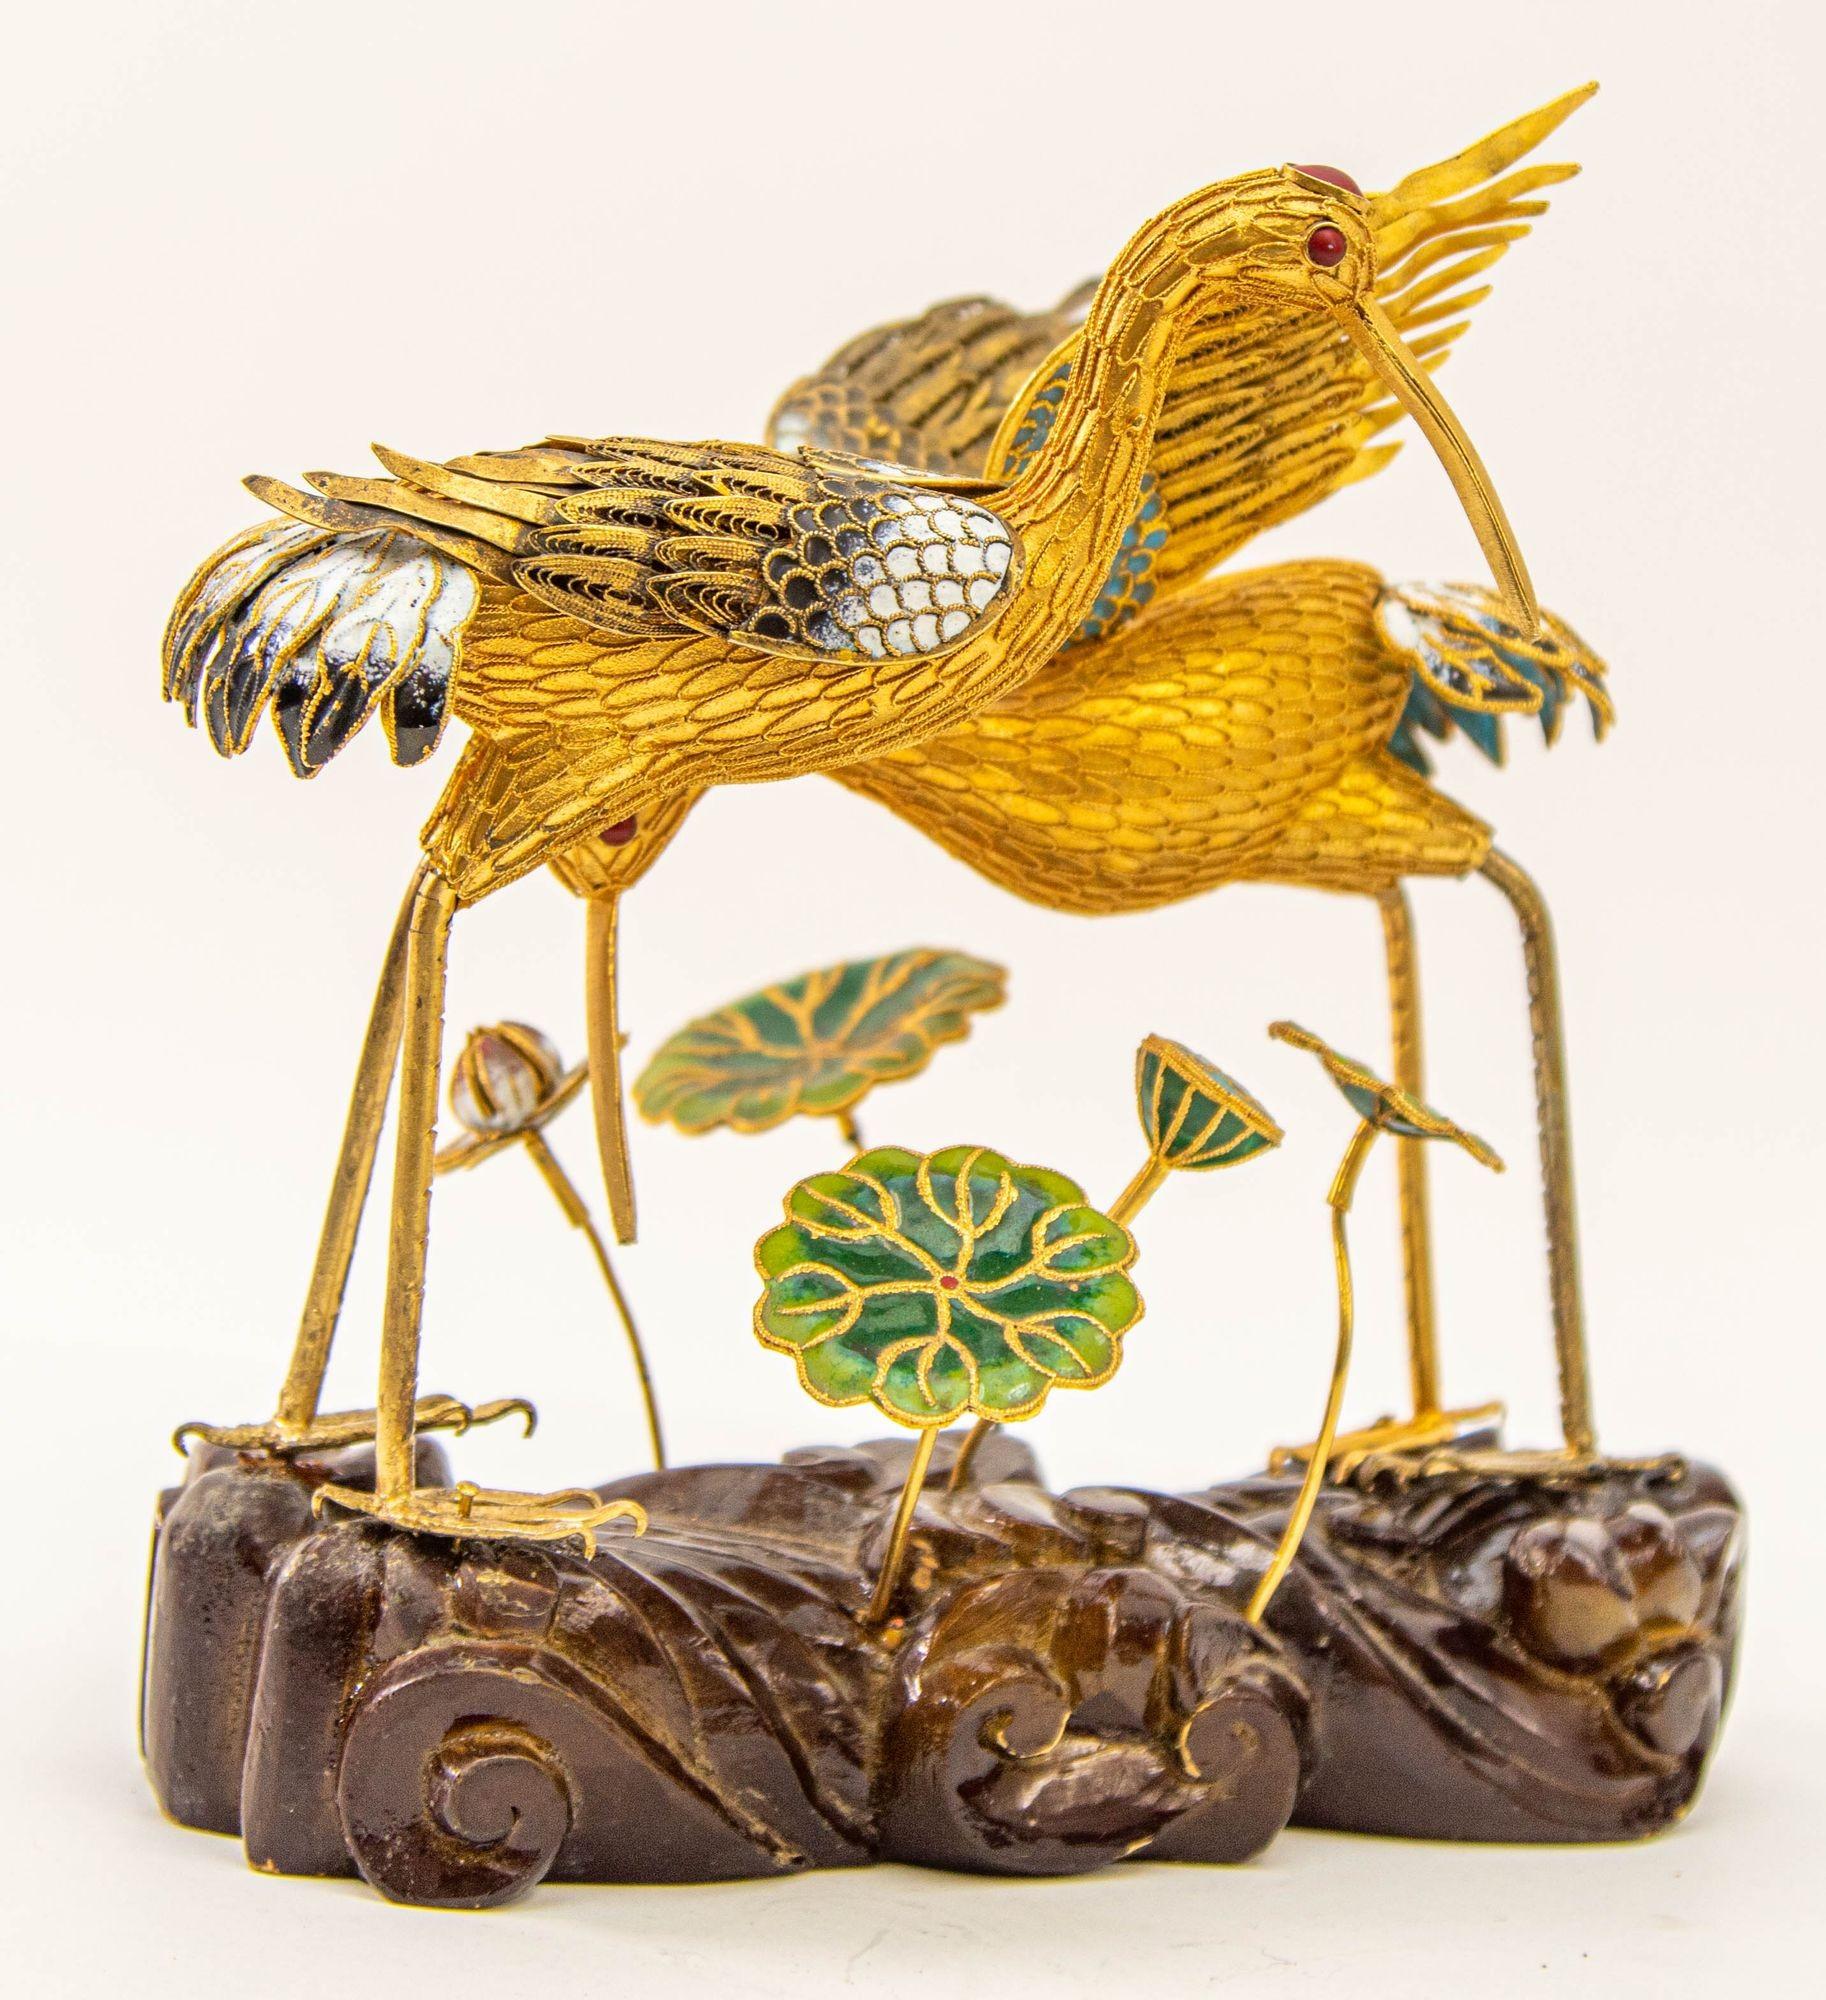 20th Century Vintage Chinese Metal Gilt Filigree and Enamel Cranes Figures on Wooden Stand For Sale